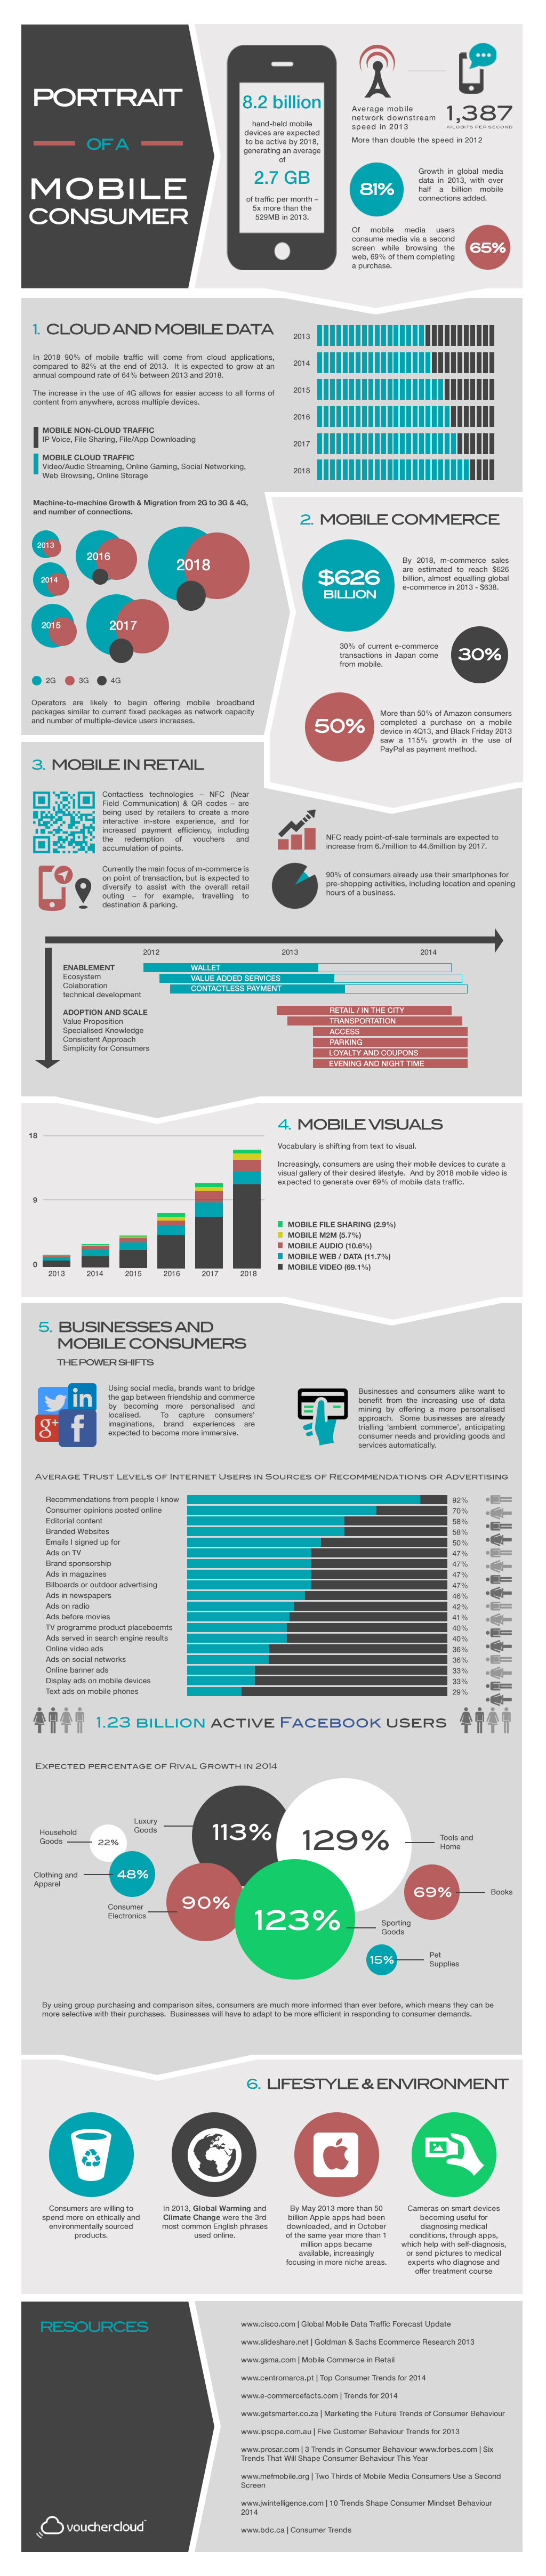 Email_instant_Mobile_Consumer_infographic